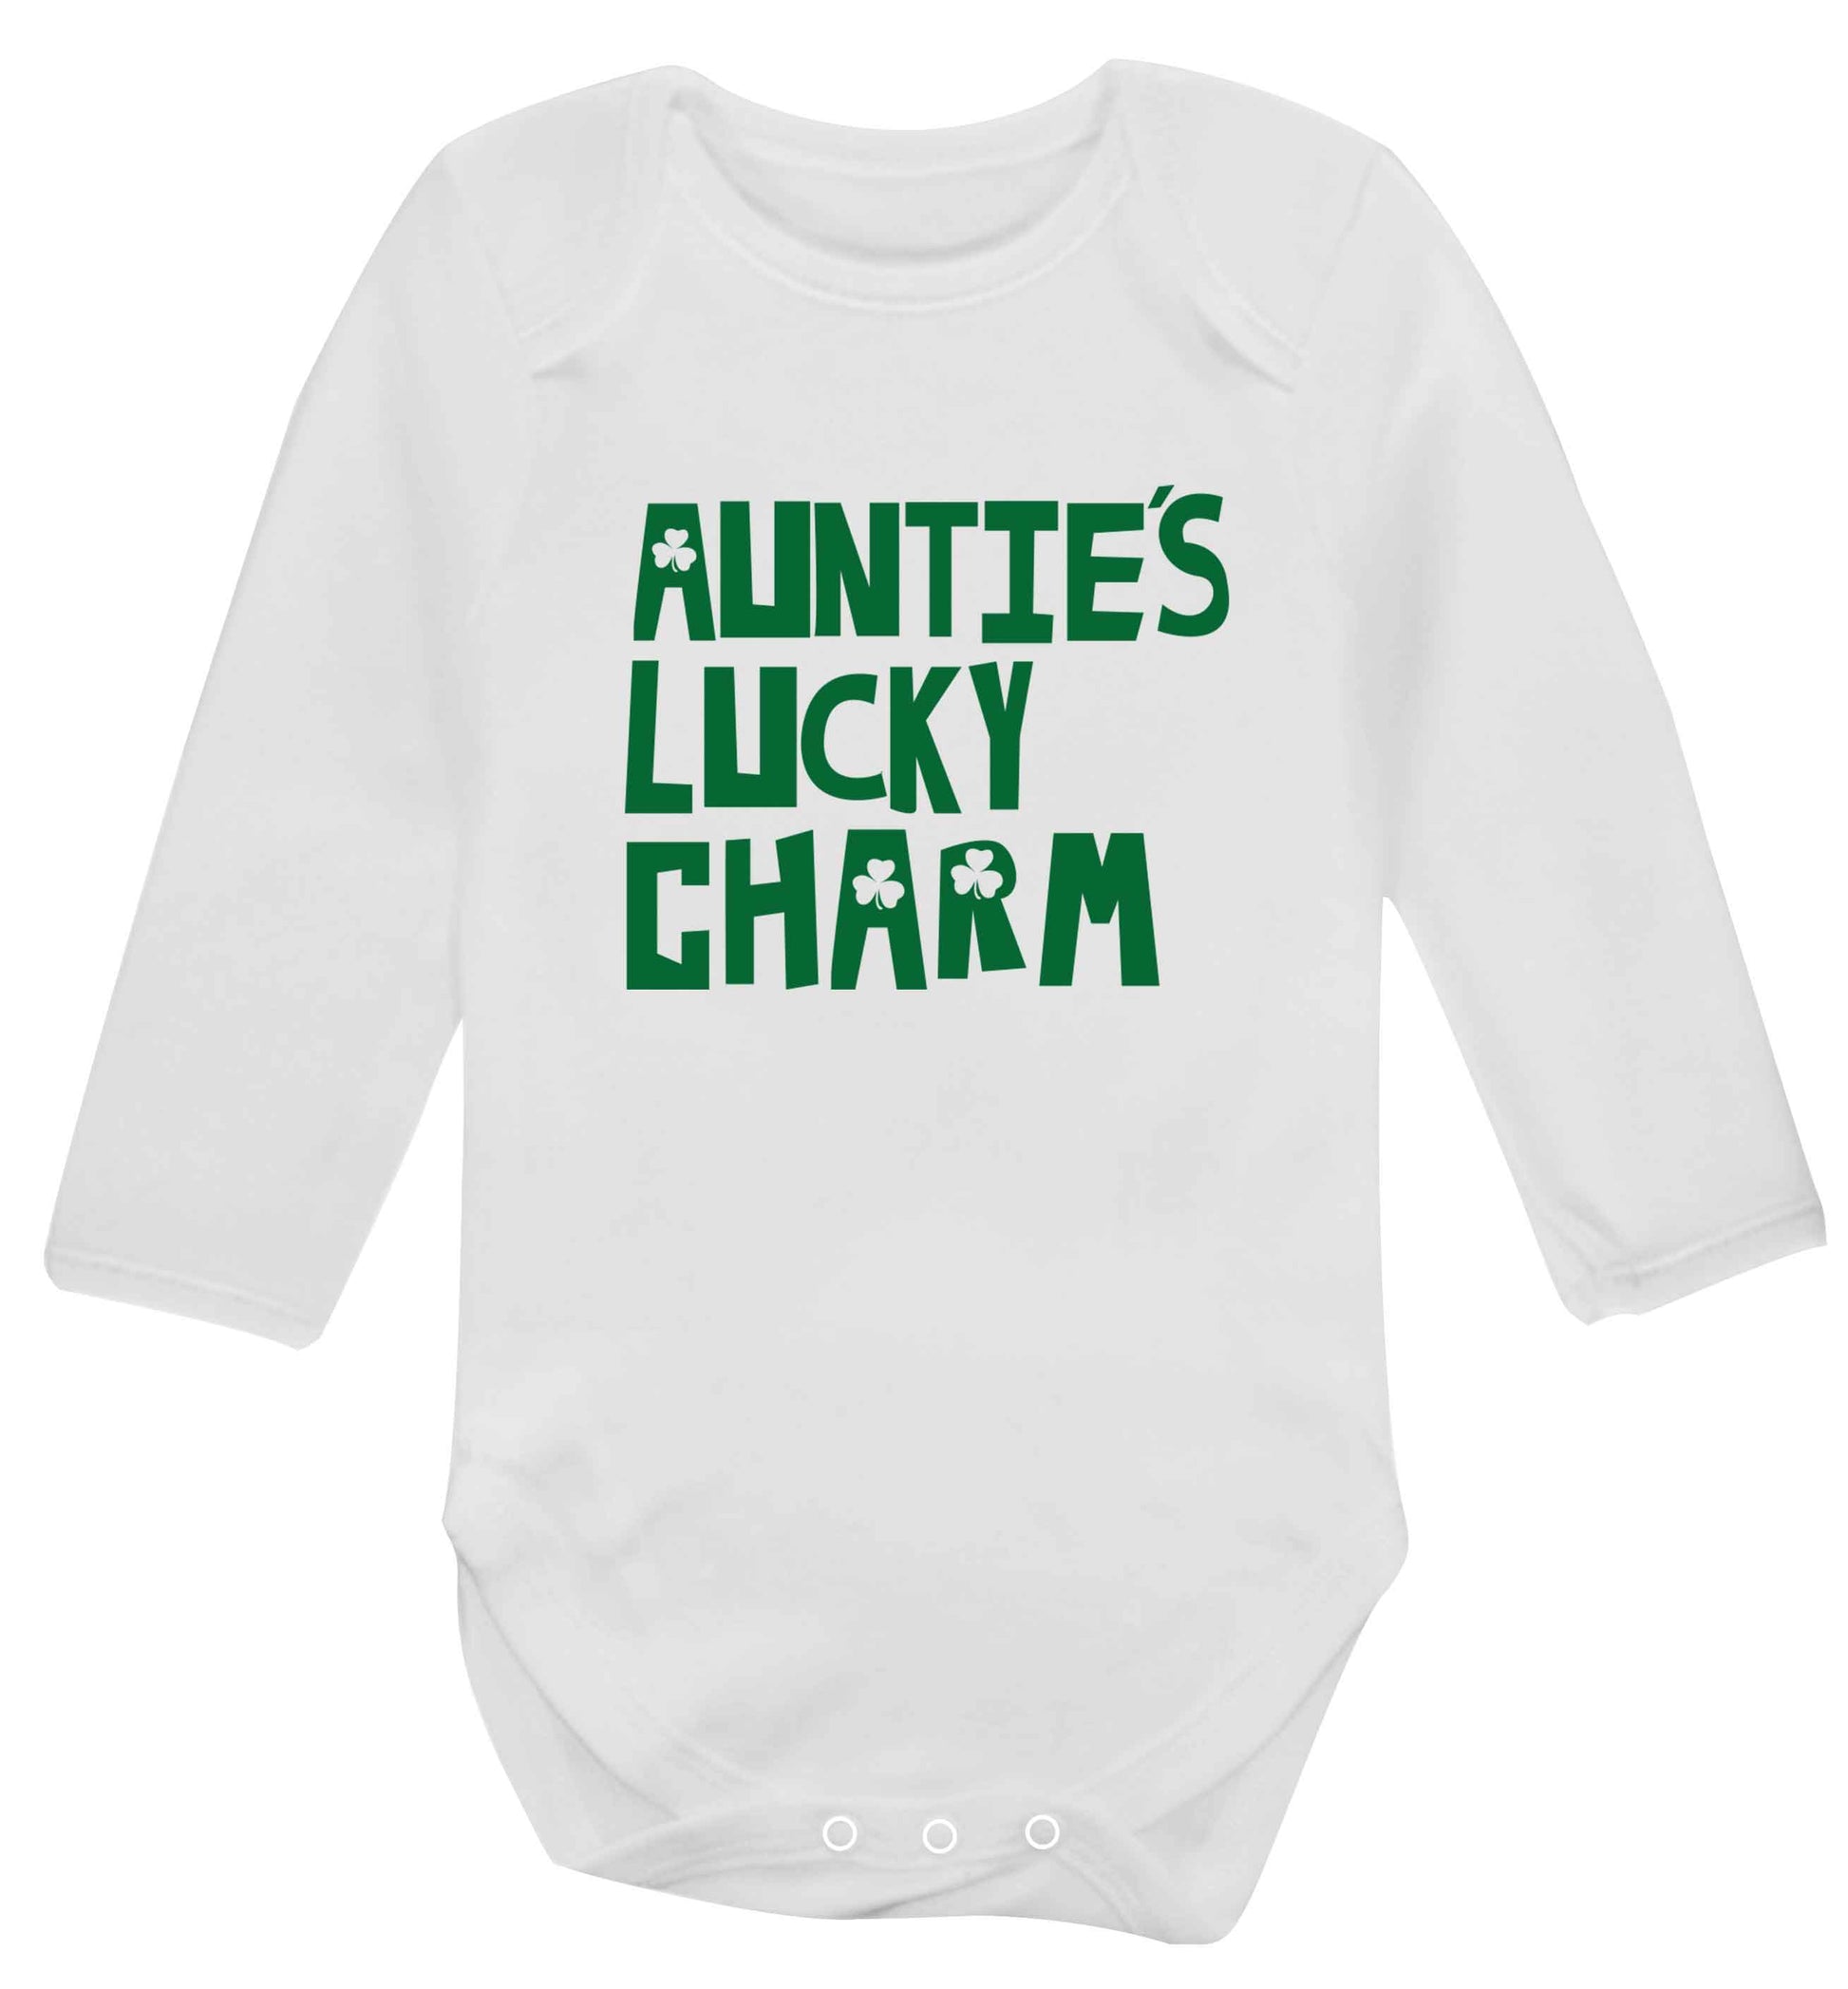 Auntie's lucky charm baby vest long sleeved white 6-12 months